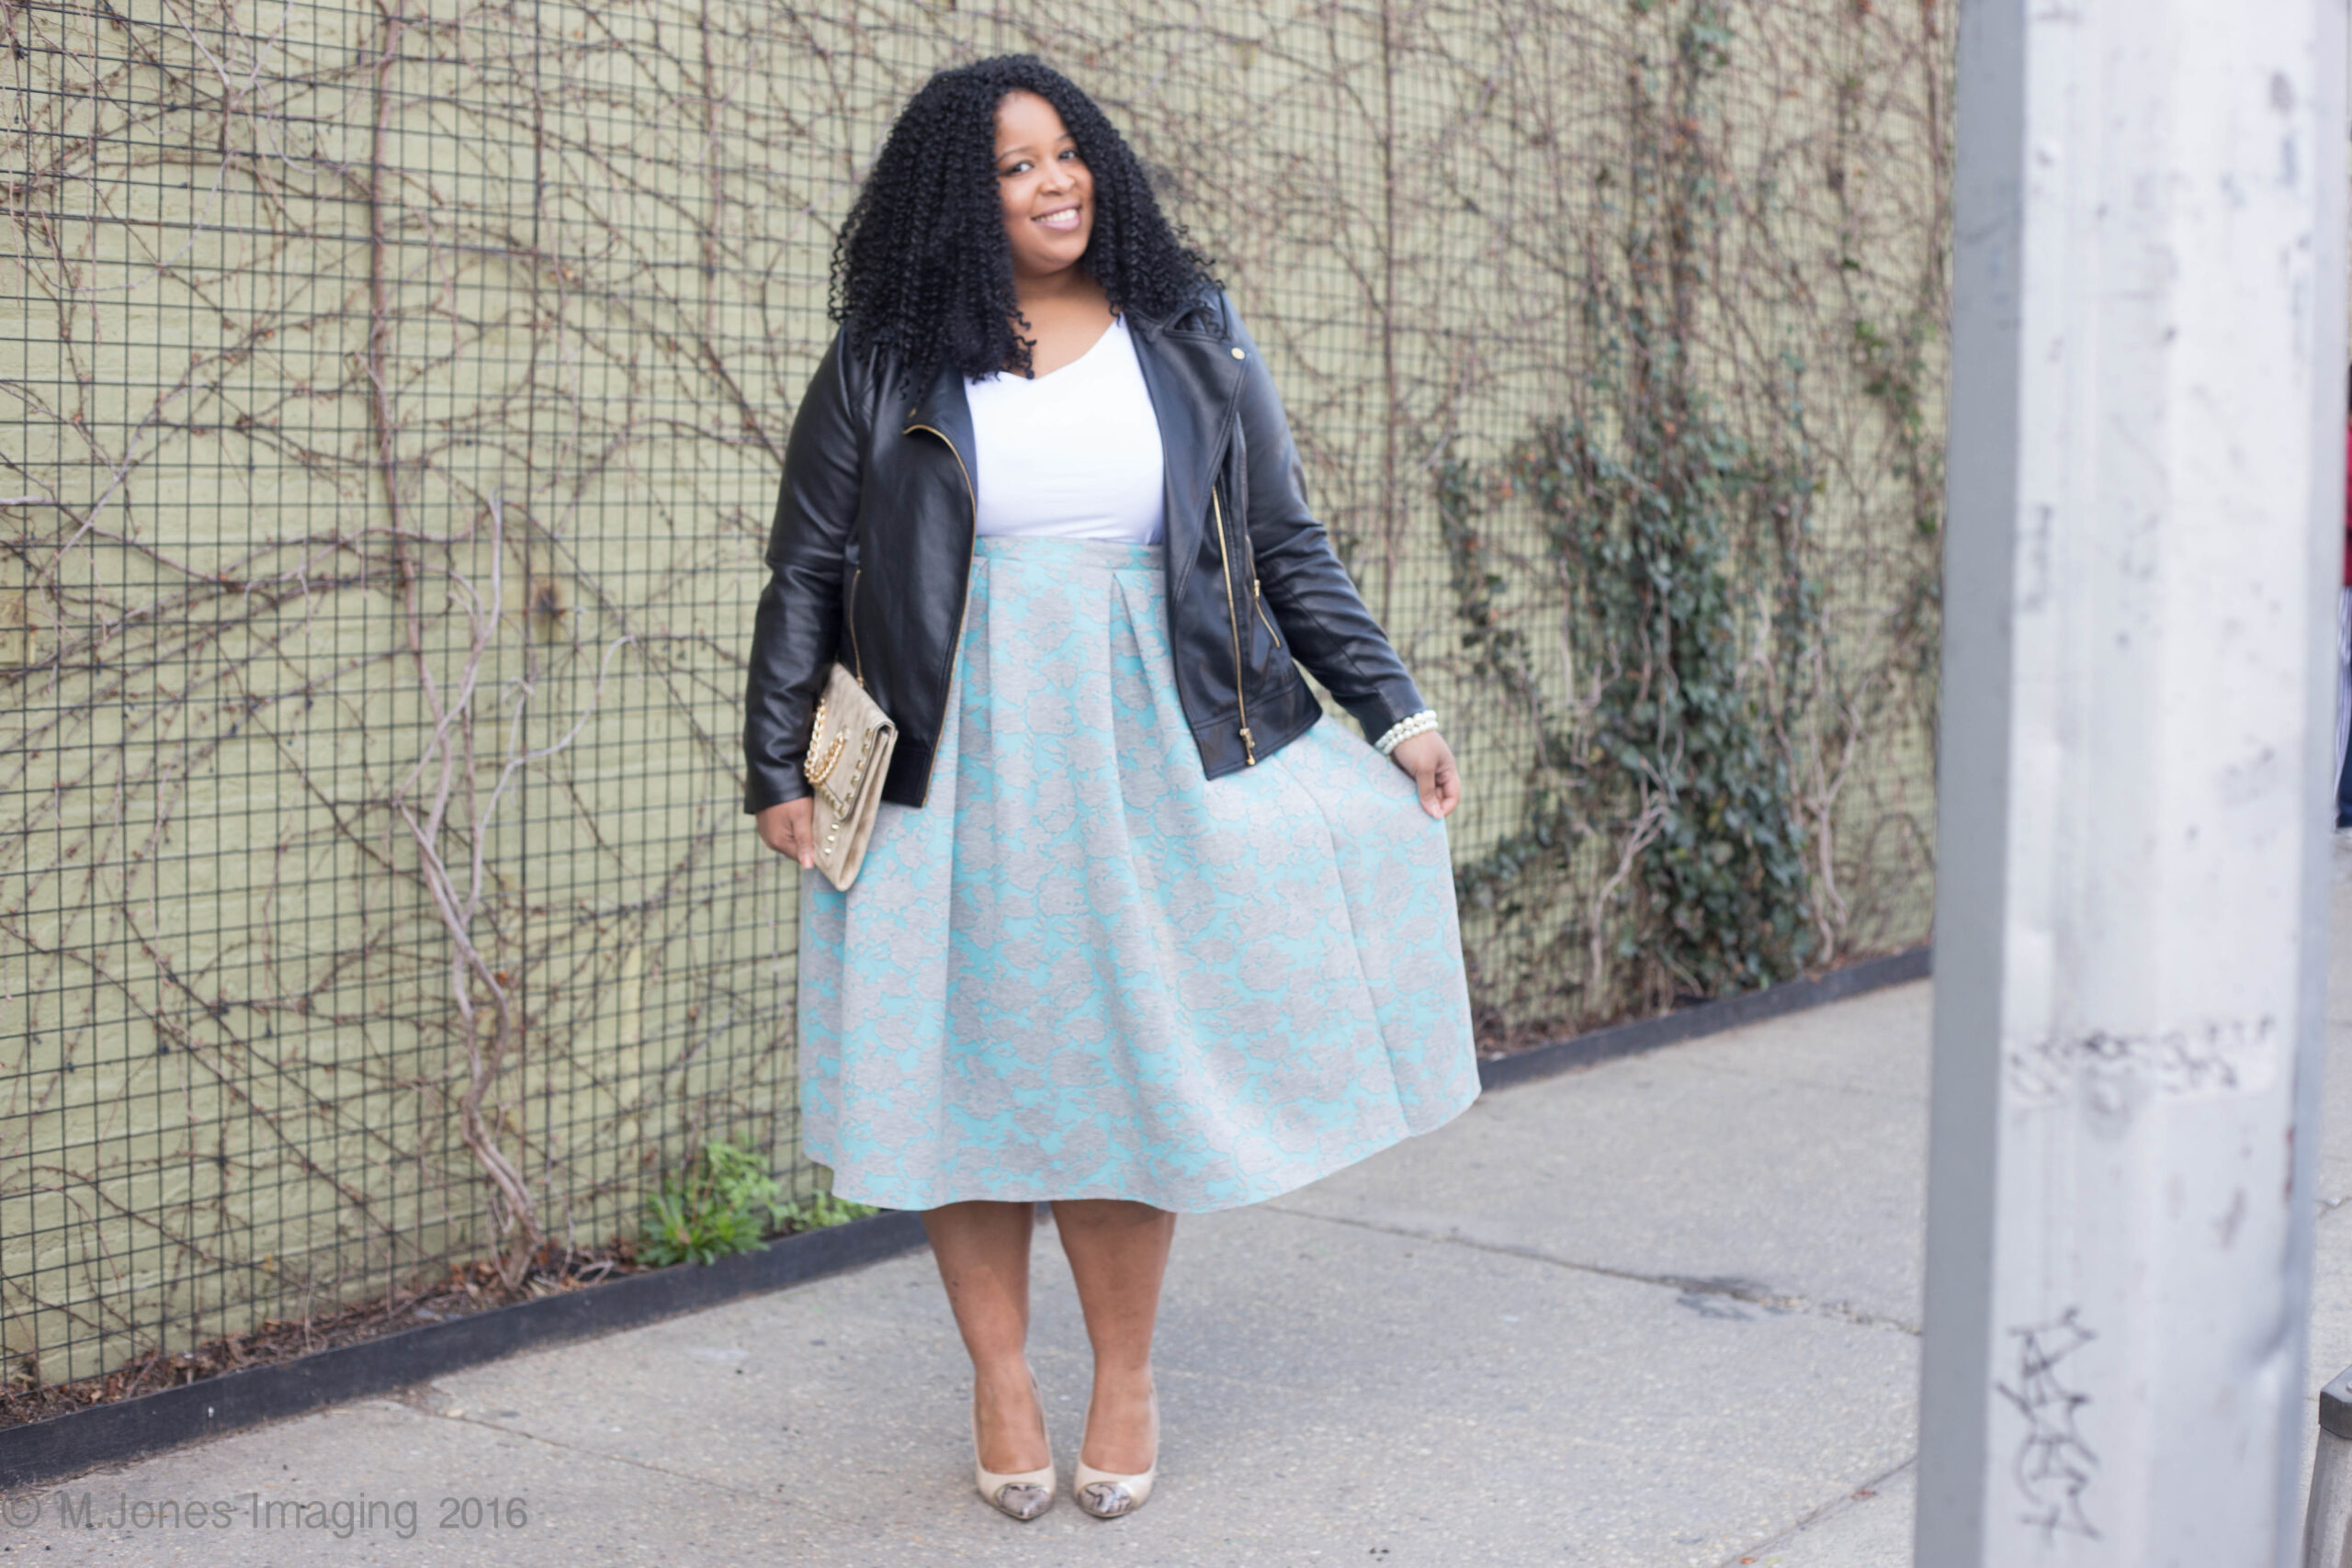 Stylish Curves Of The Day: Chardline From Plus Size Beausion